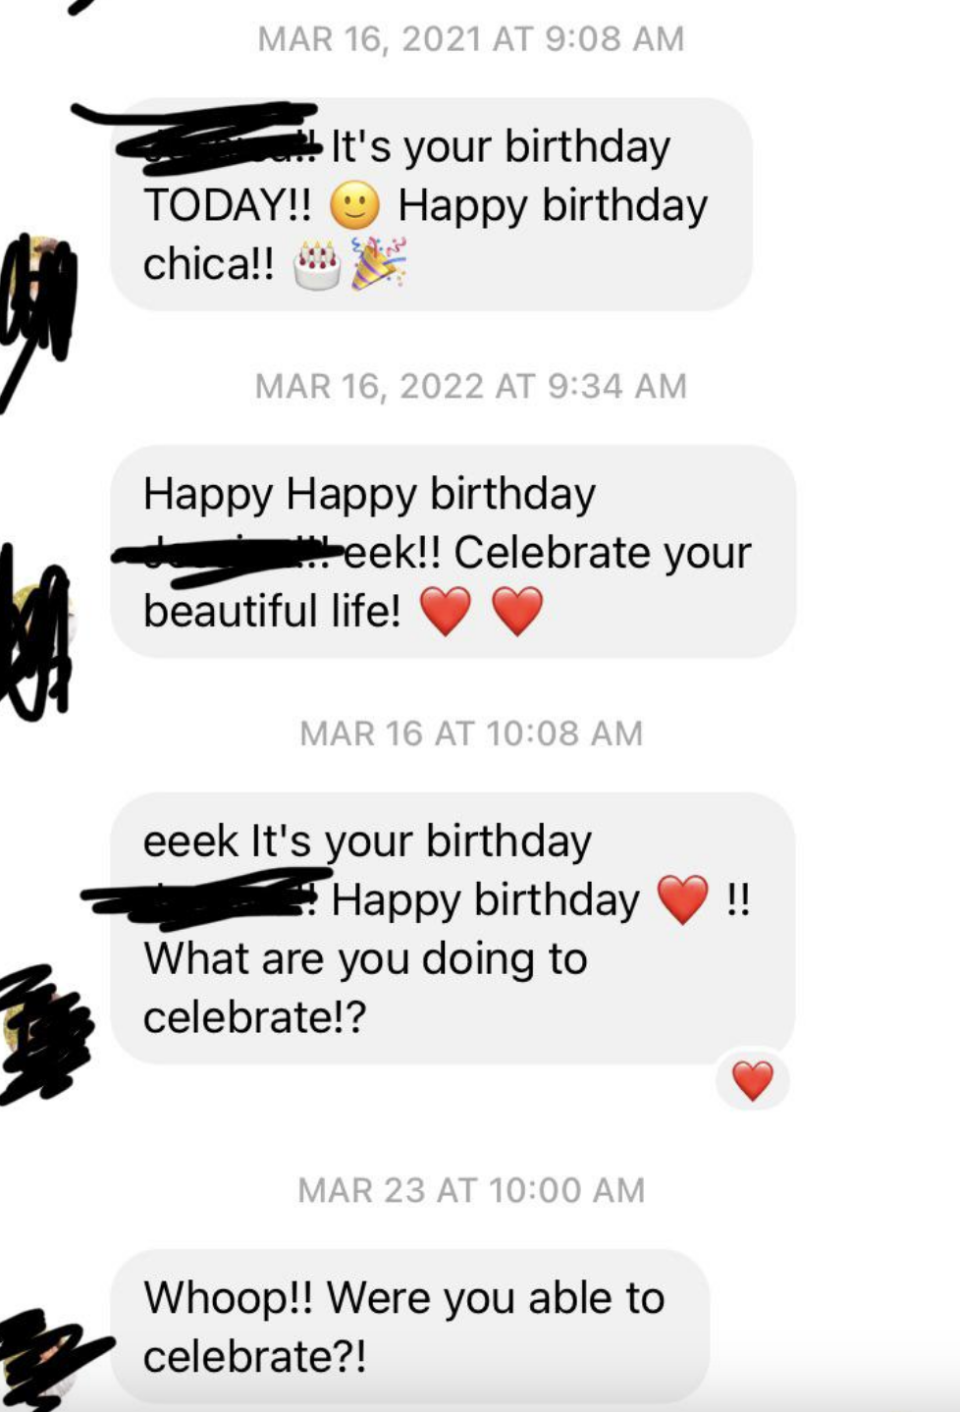 several messages over the years saying happy birthday